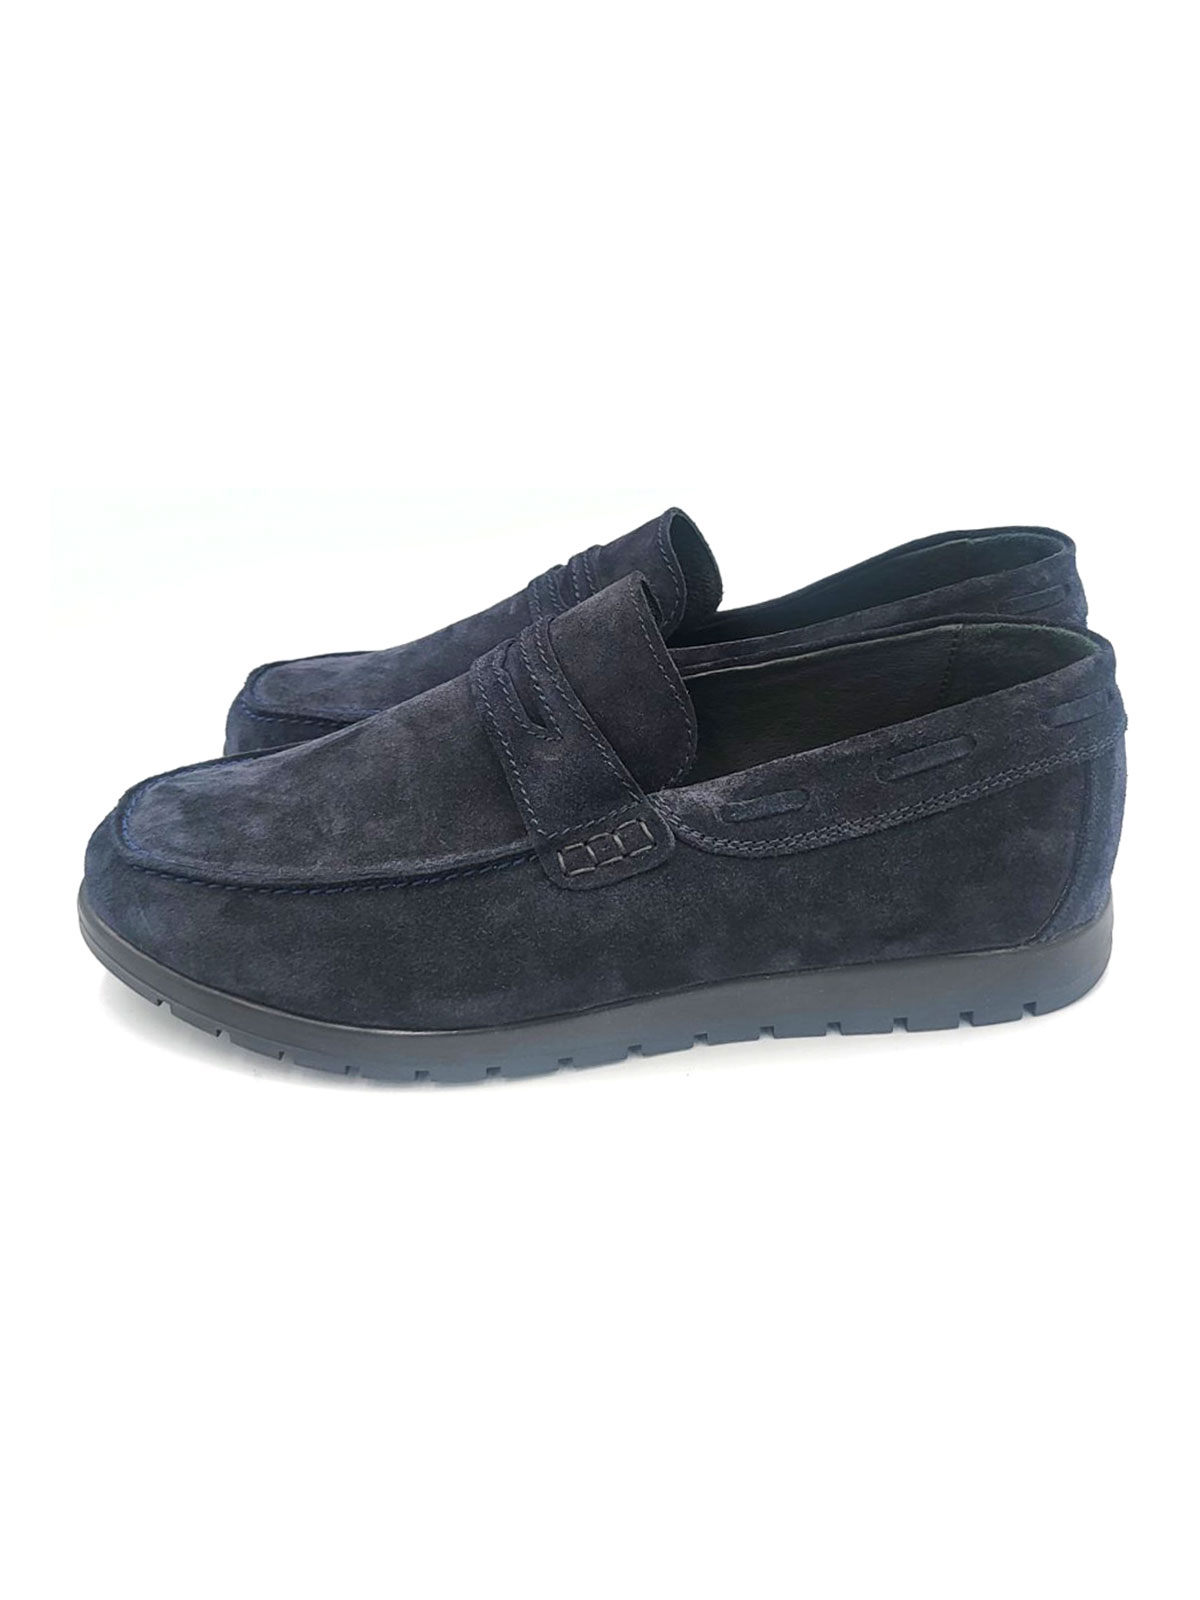 Navy suede loafers - 81093 - € 78.18 img2